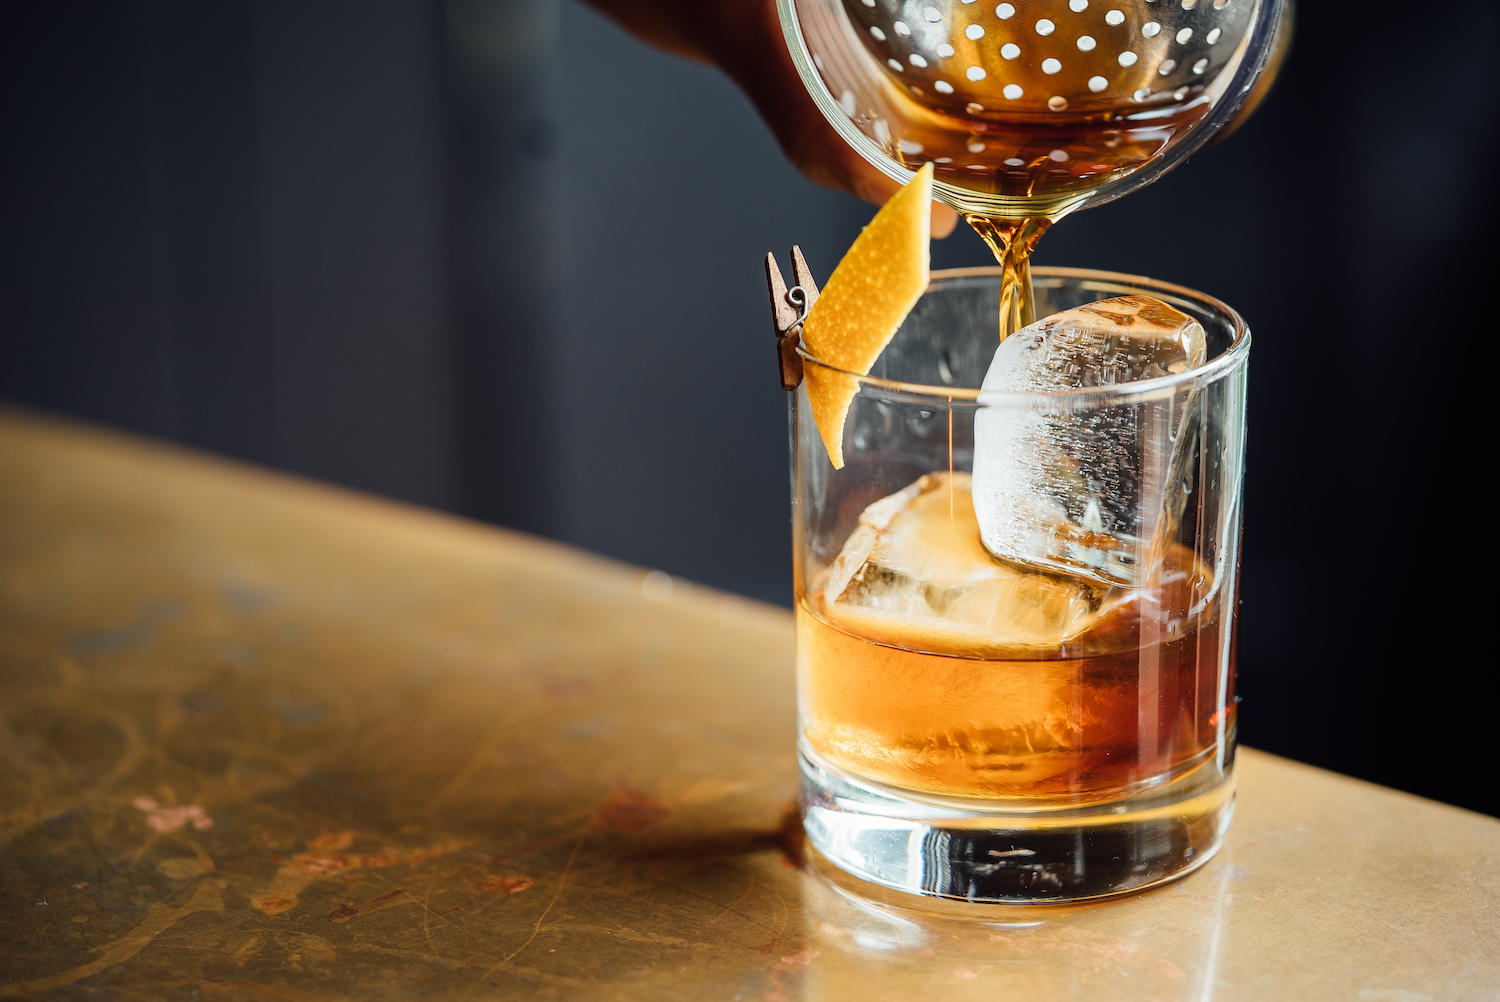 Pouring an old fashioned.